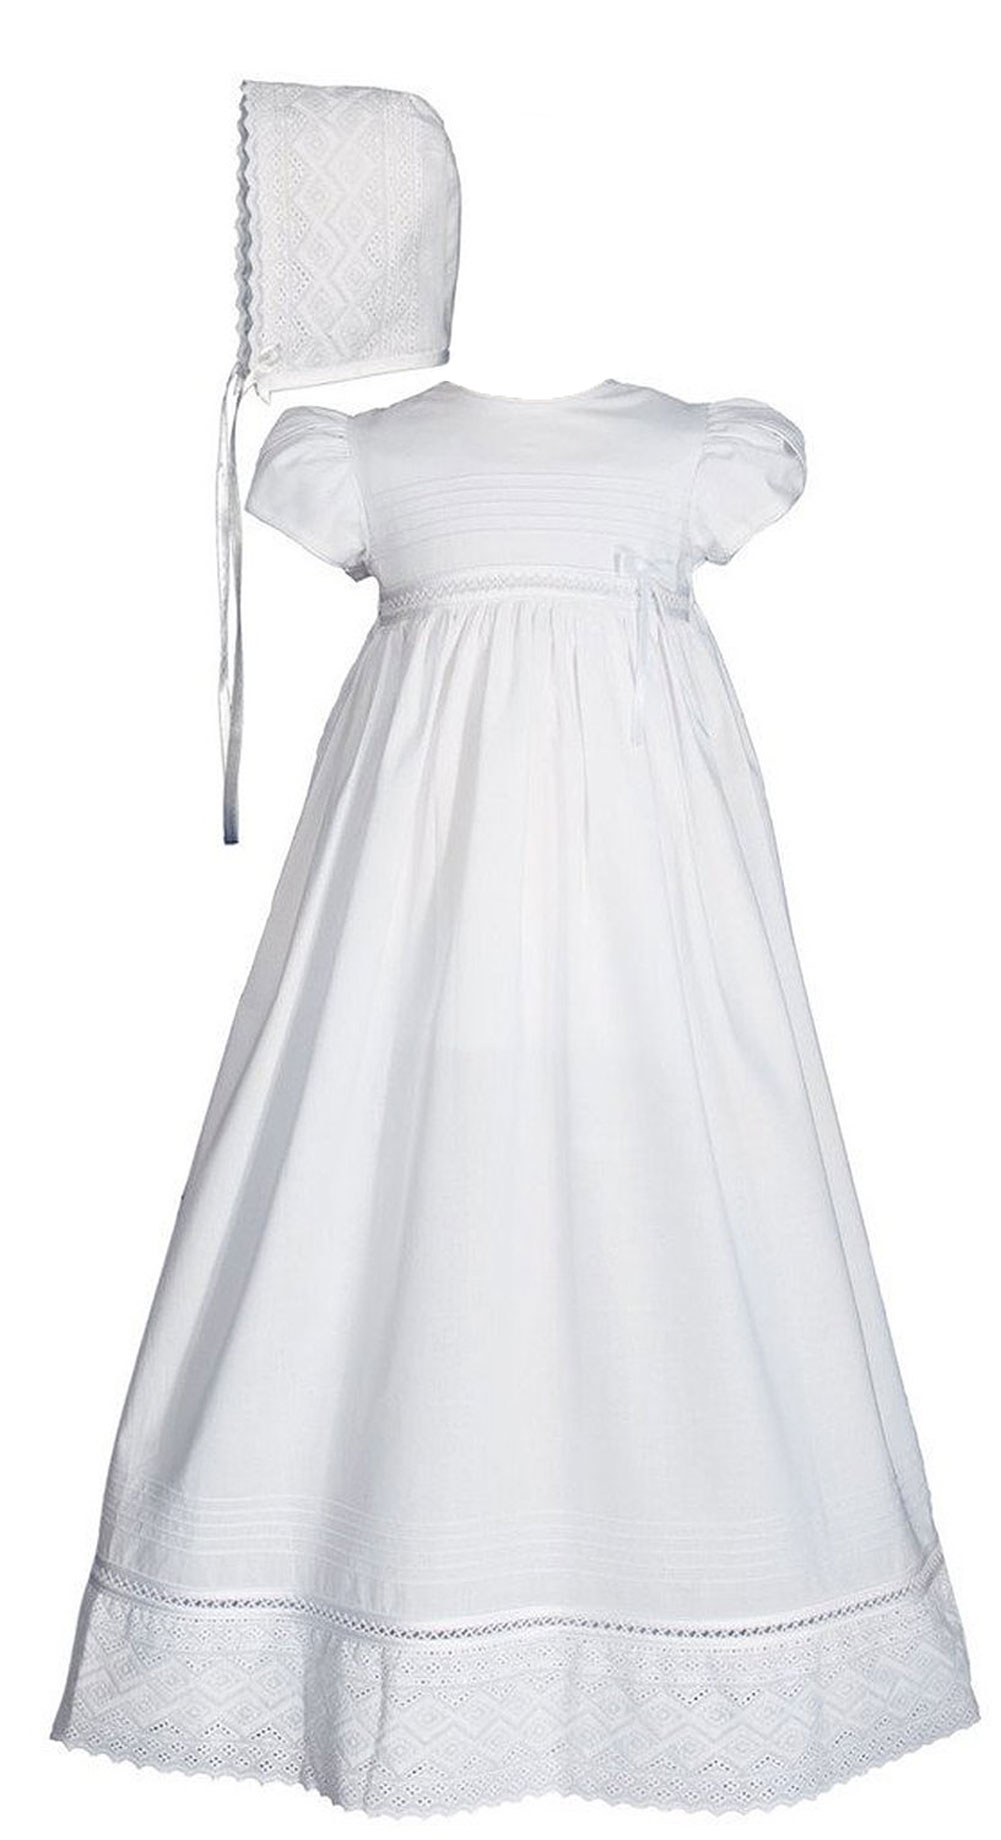 white baptism gown